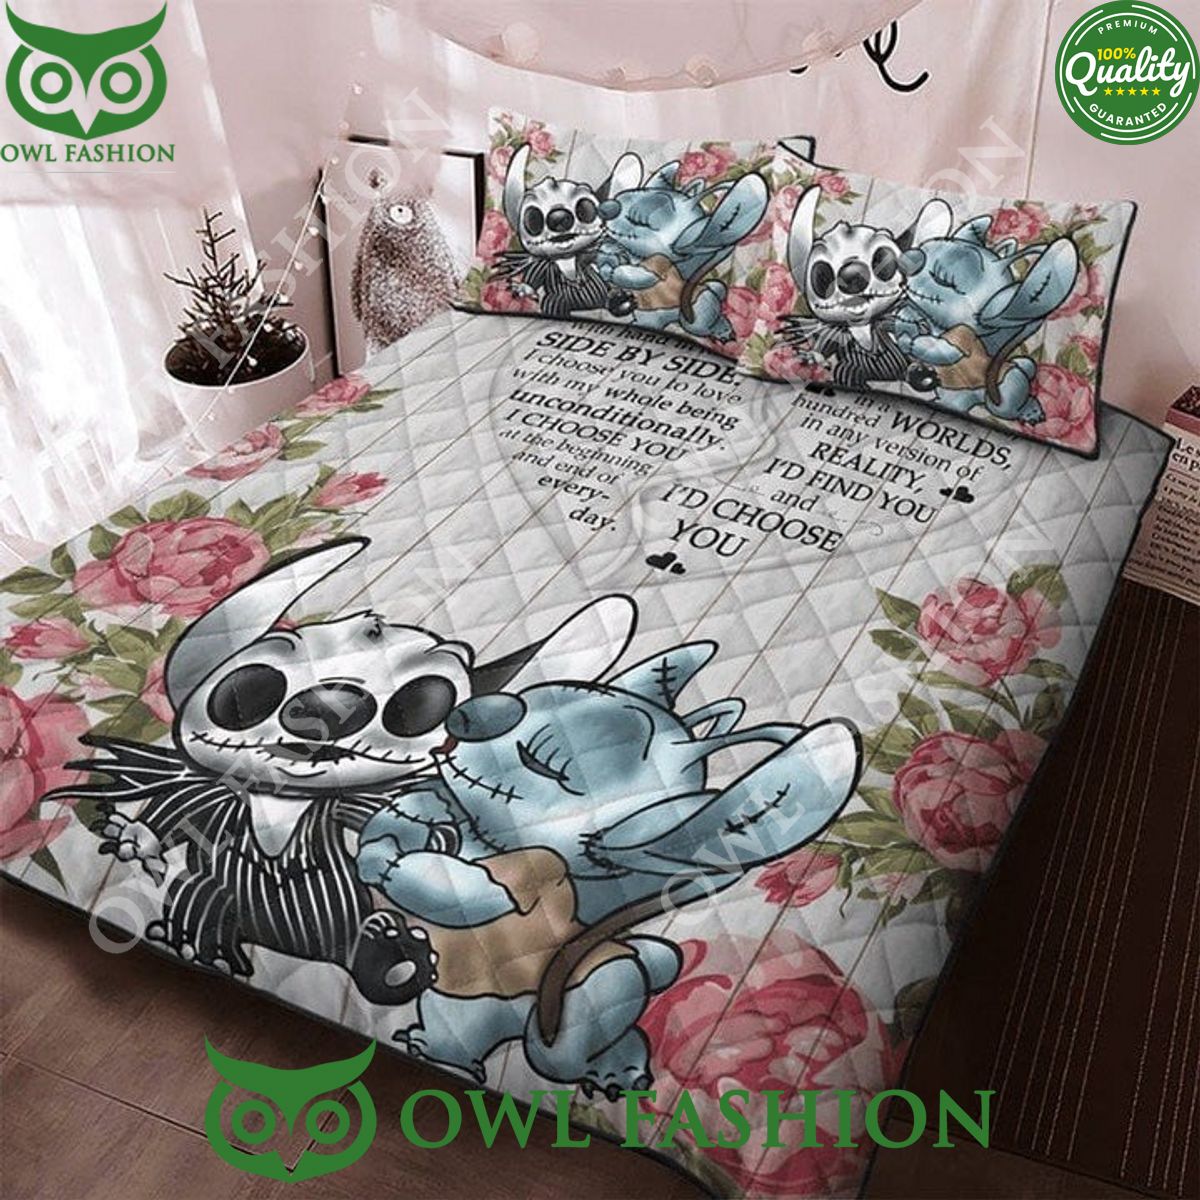 stitch and lilo couple i choose you find you side by side halloween quilt bedding set 1 pKbRj.jpg